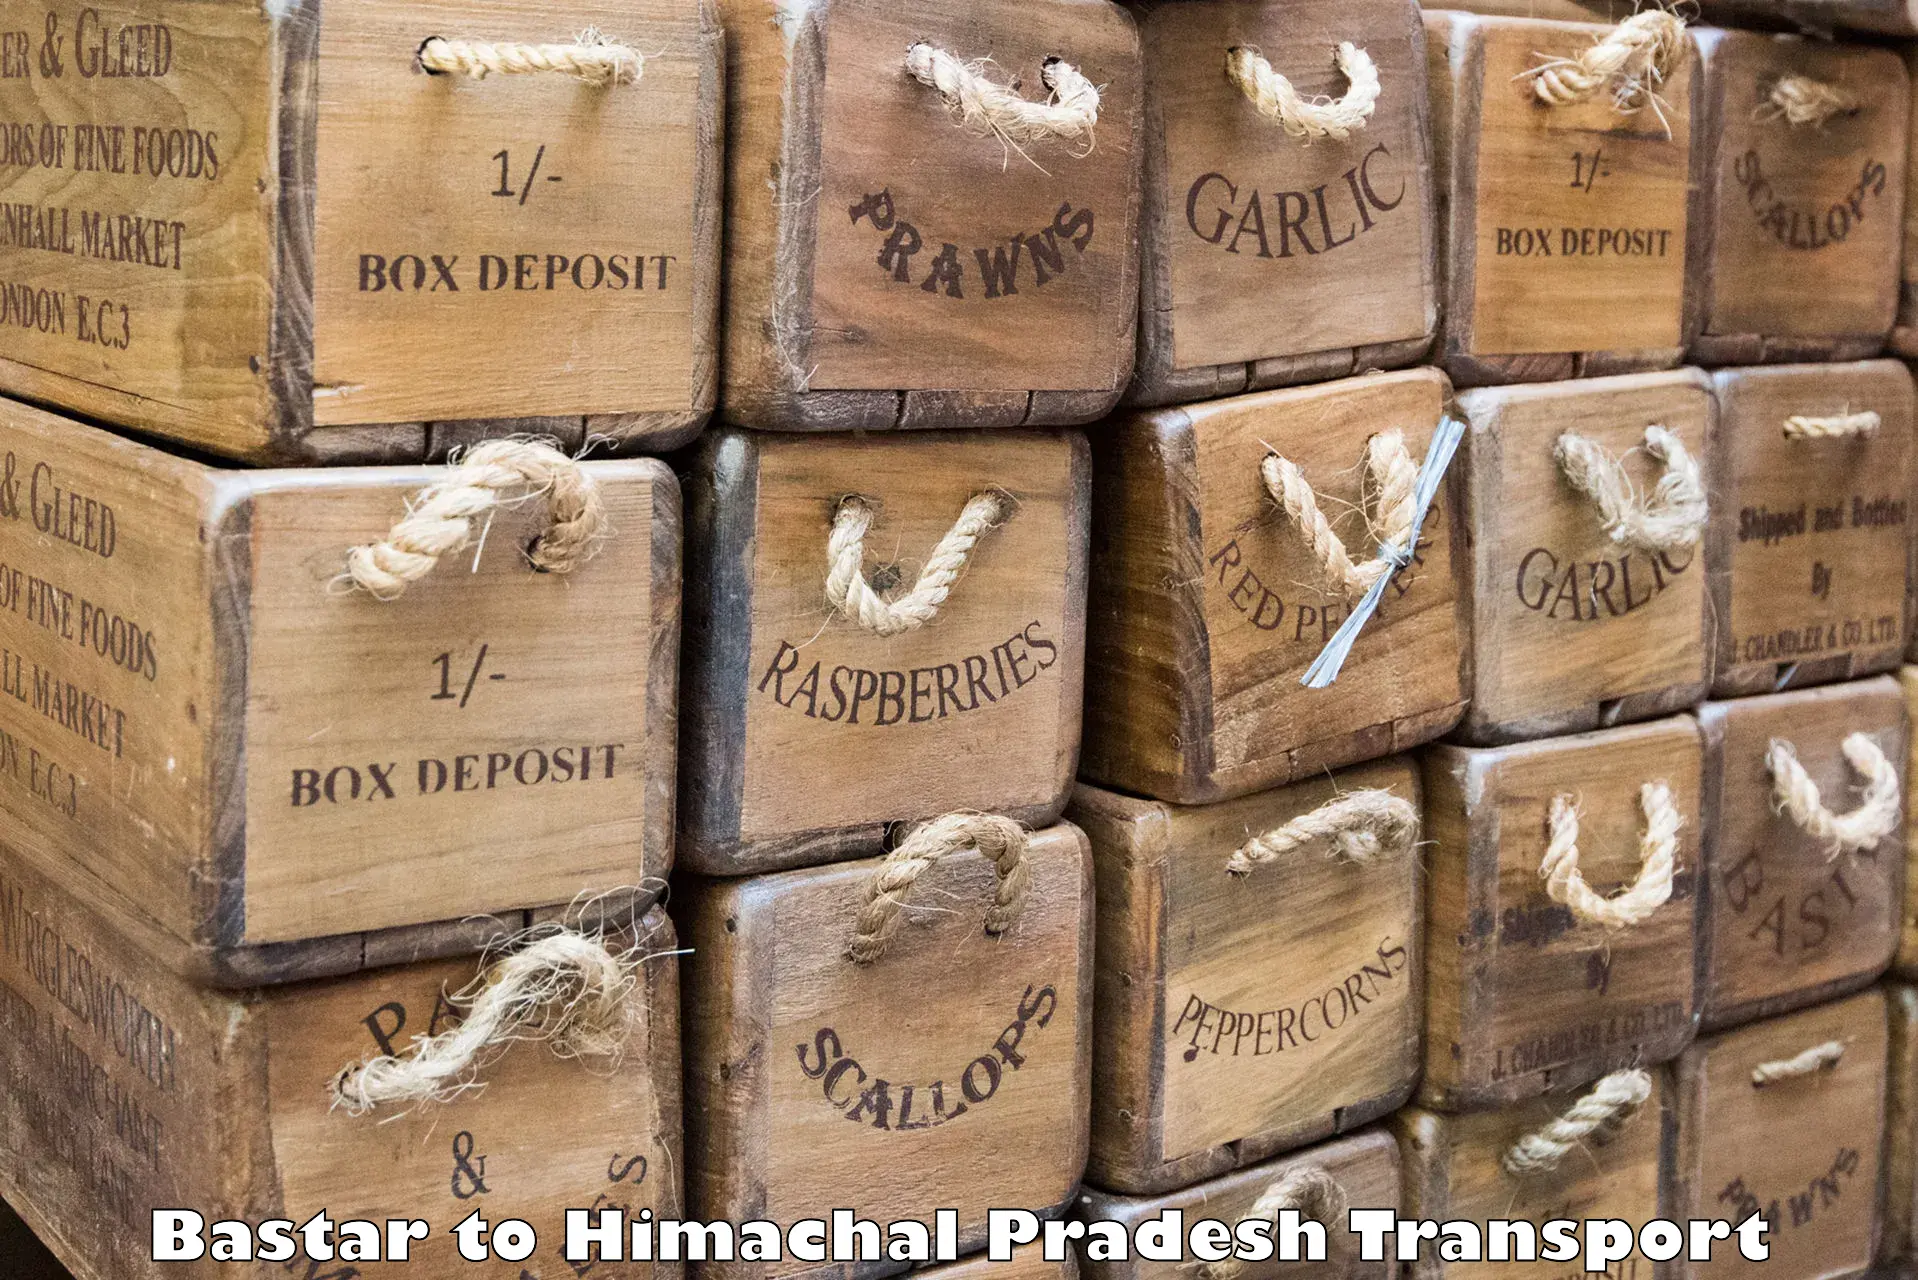 Commercial transport service Bastar to Palampur